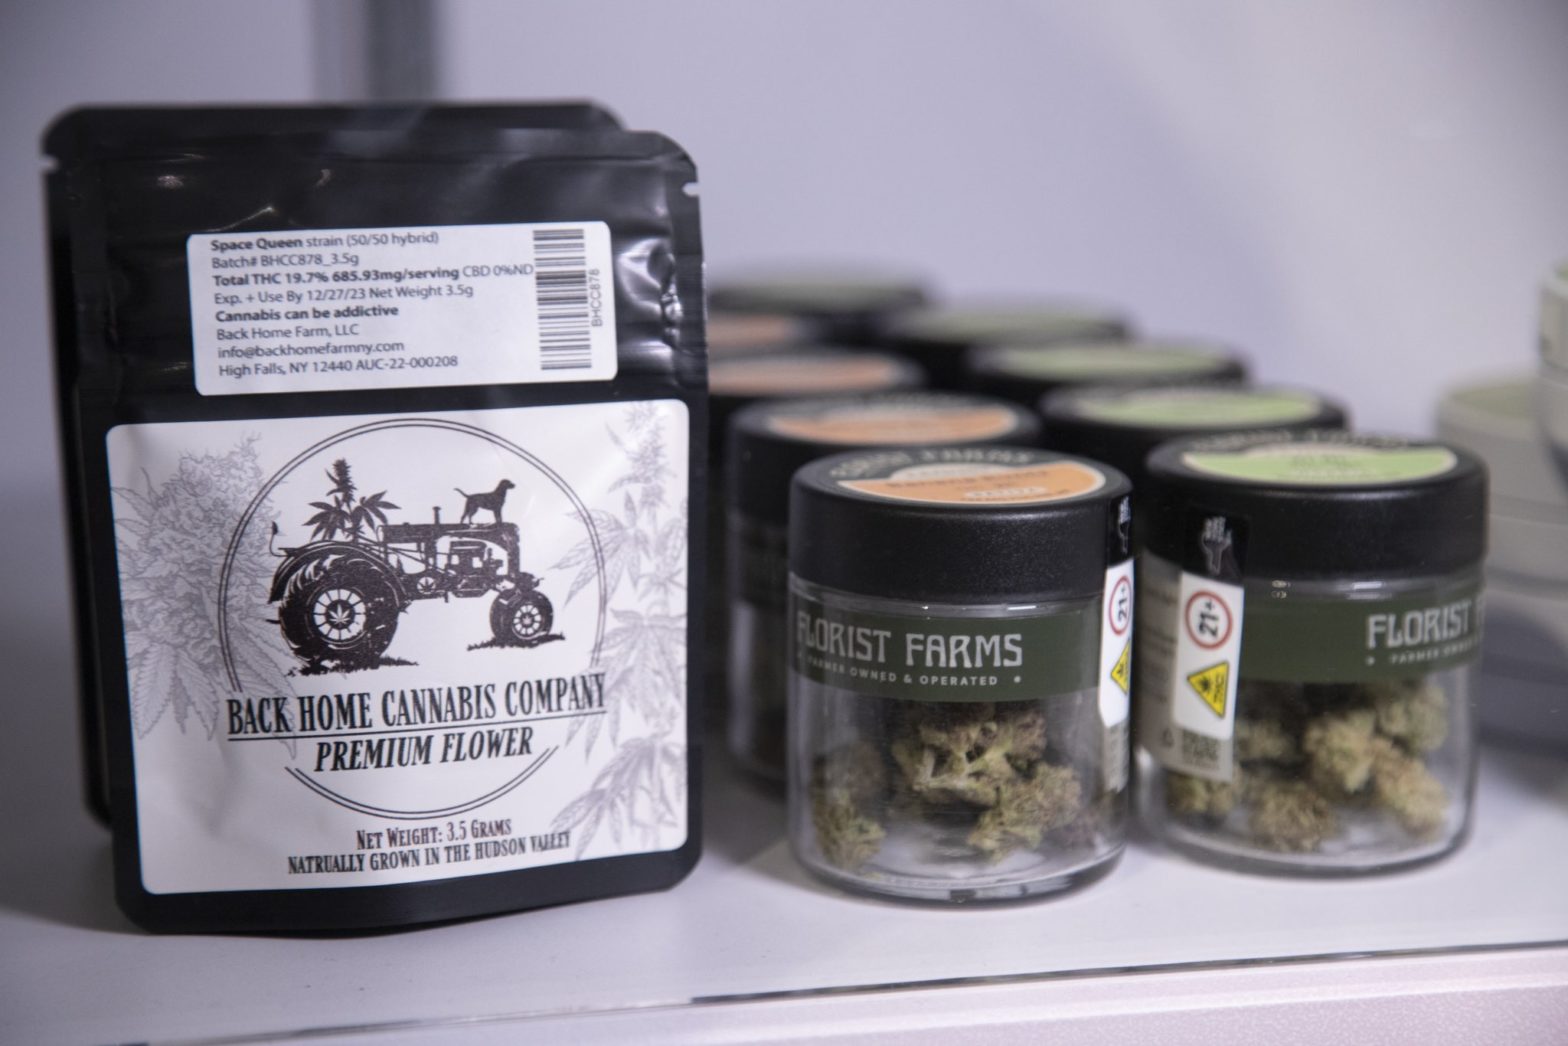 Potheads Rejoice! NYC Opens Its First Cannabis Dispensary